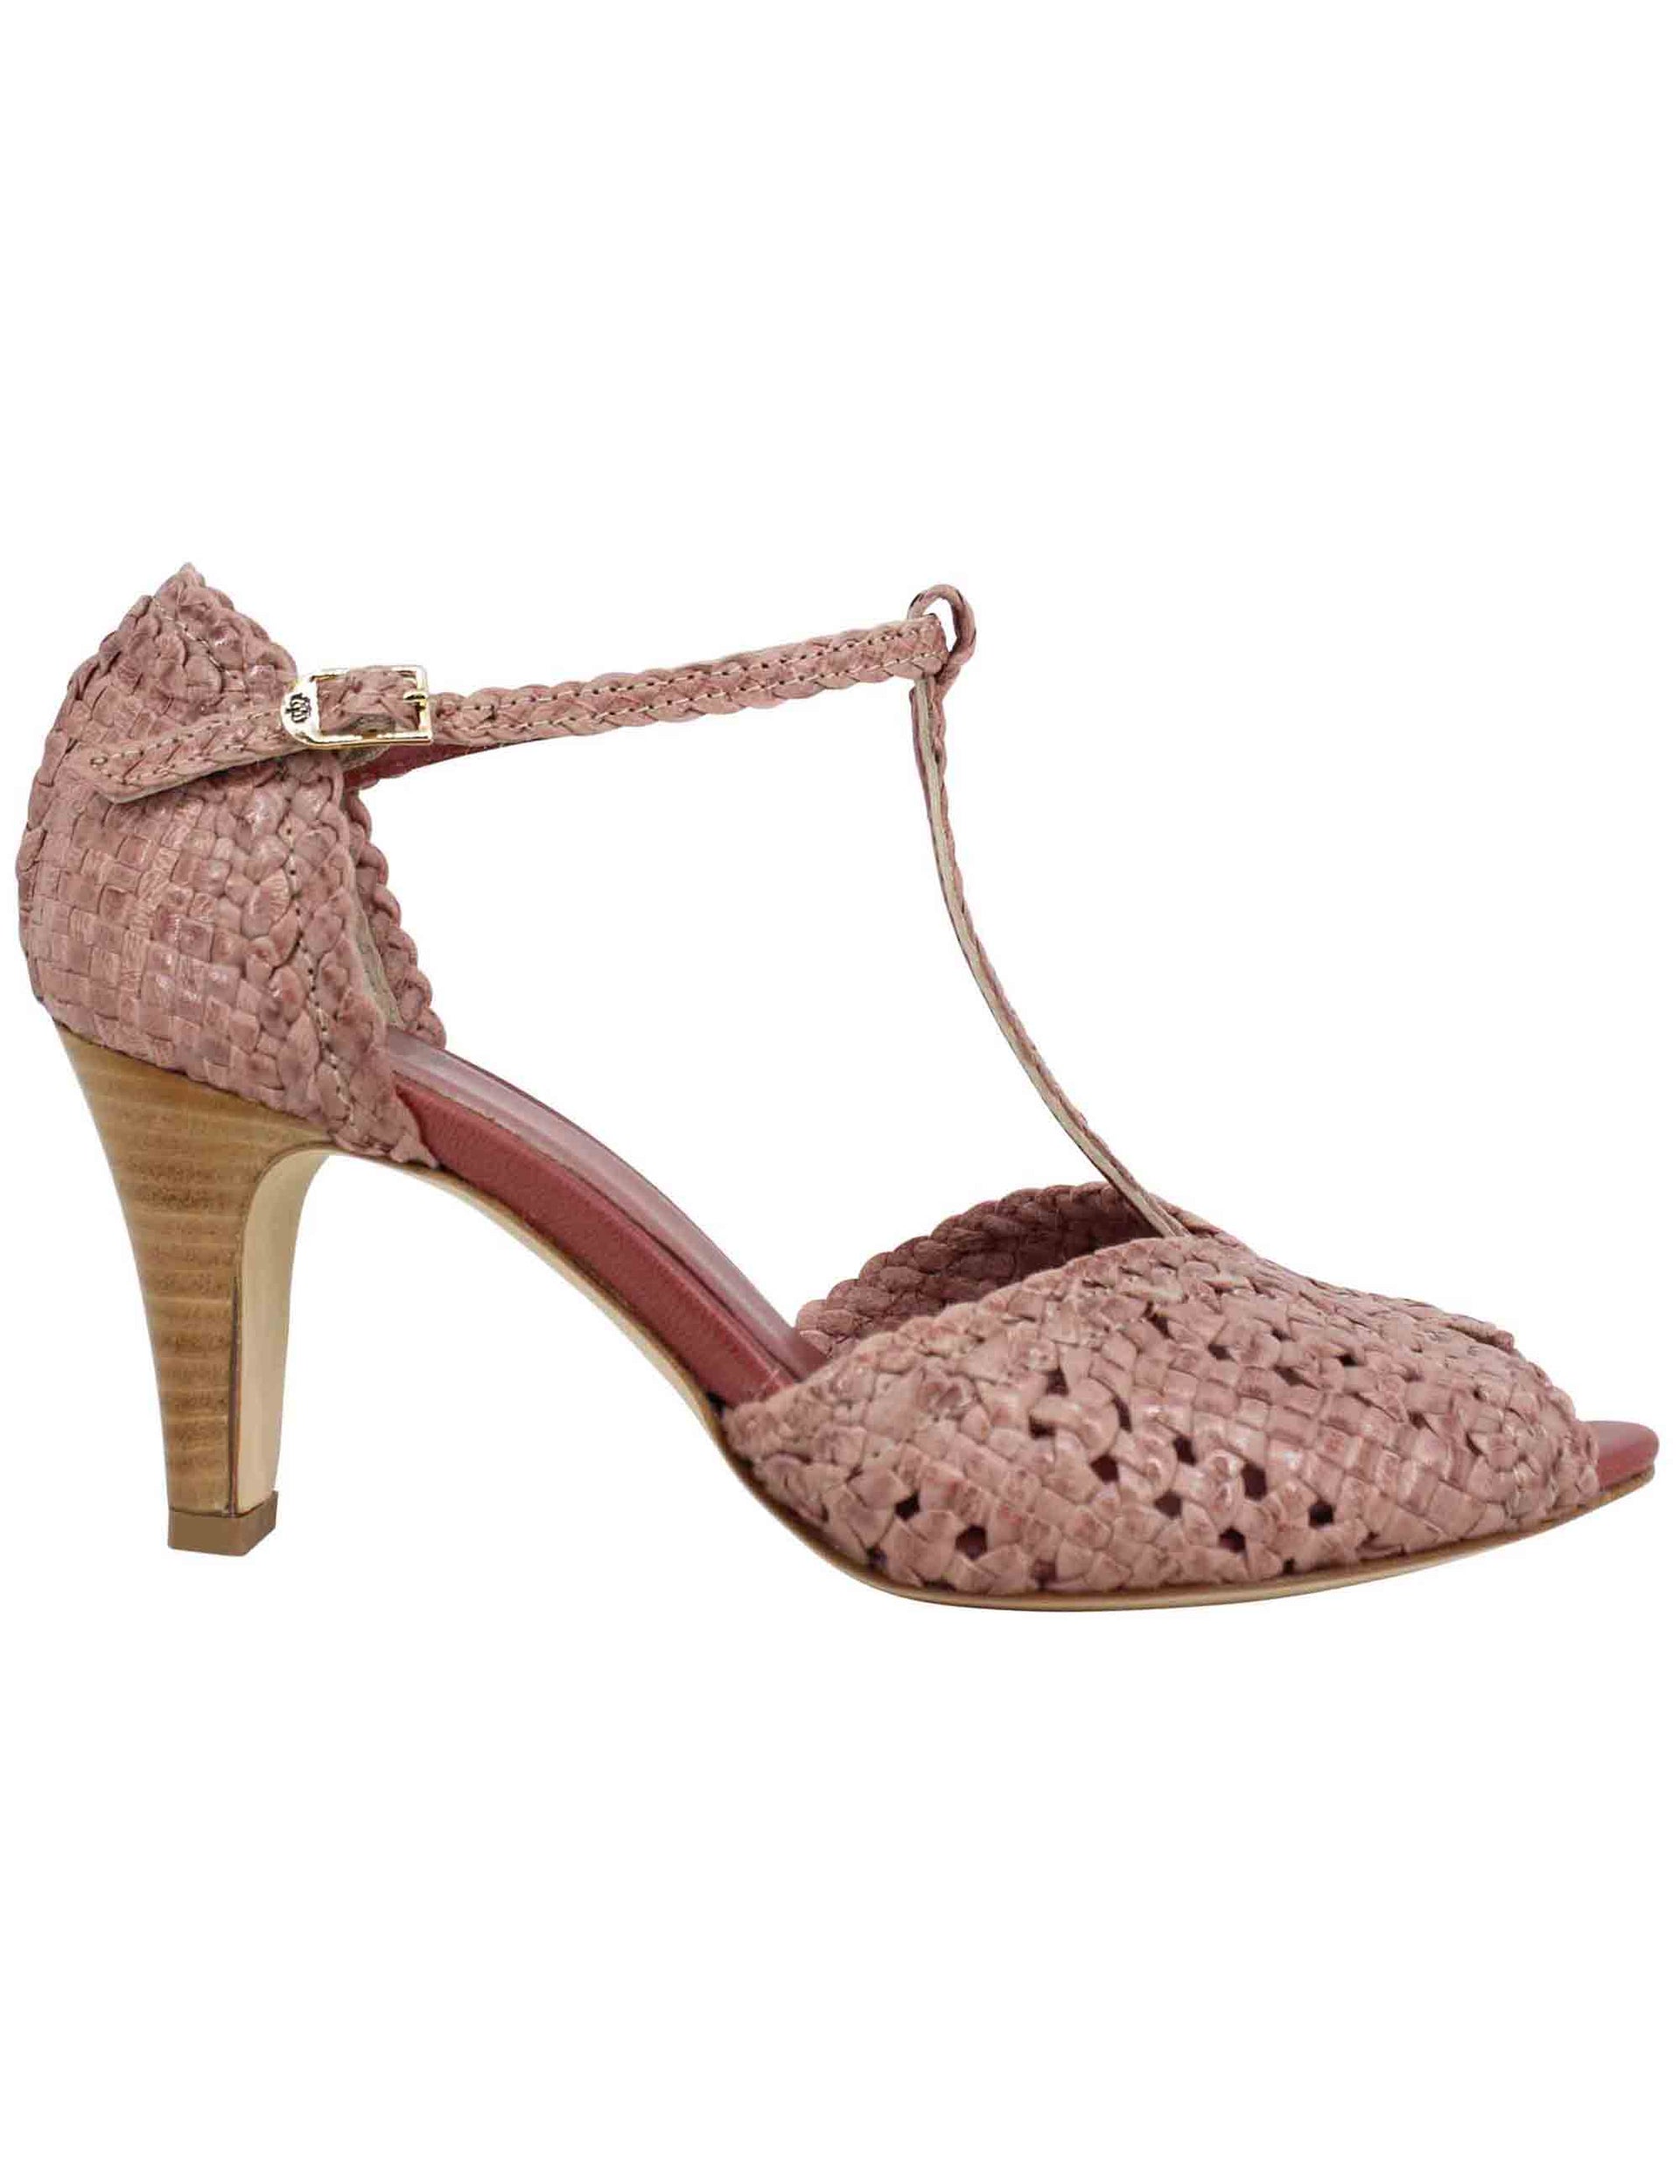 Women's pink woven leather sandals with high heel